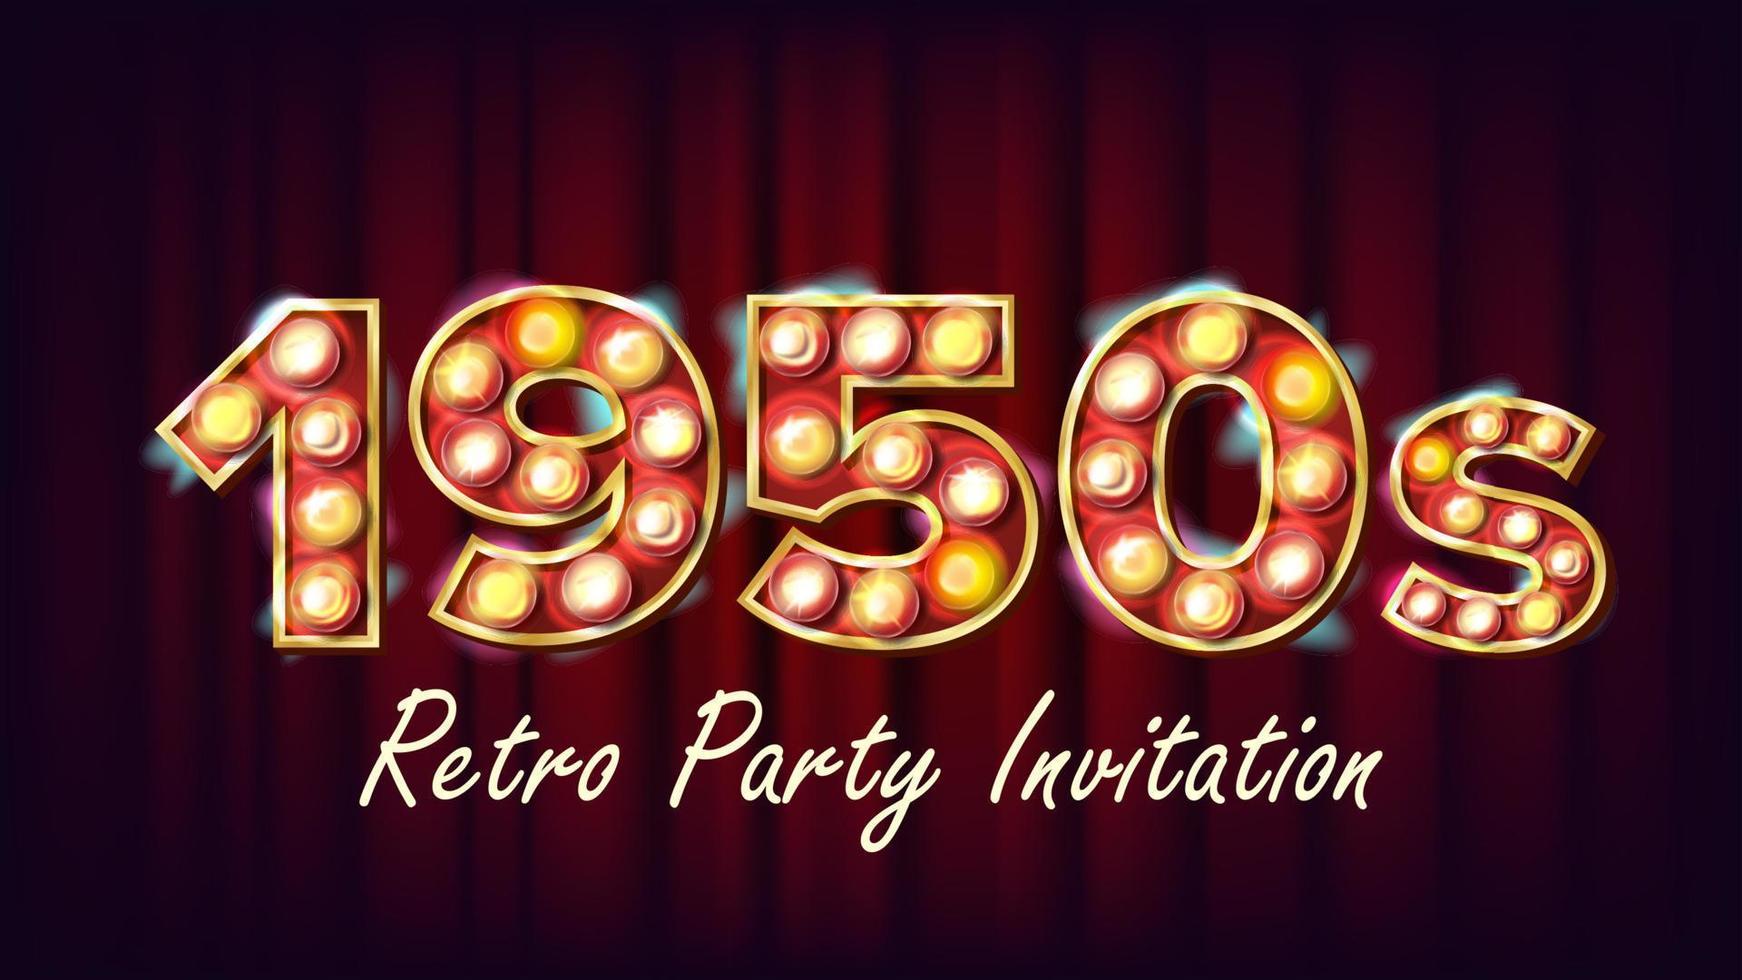 1950s Retro Party Invitation Vector. 1950 Style Design. Shine Lamp Bulb. Glowing Digit. Illuminated Retro Poster, Flyer, Banner Template. Night Club, Disco Party Event Advertising Vintage Illustration vector